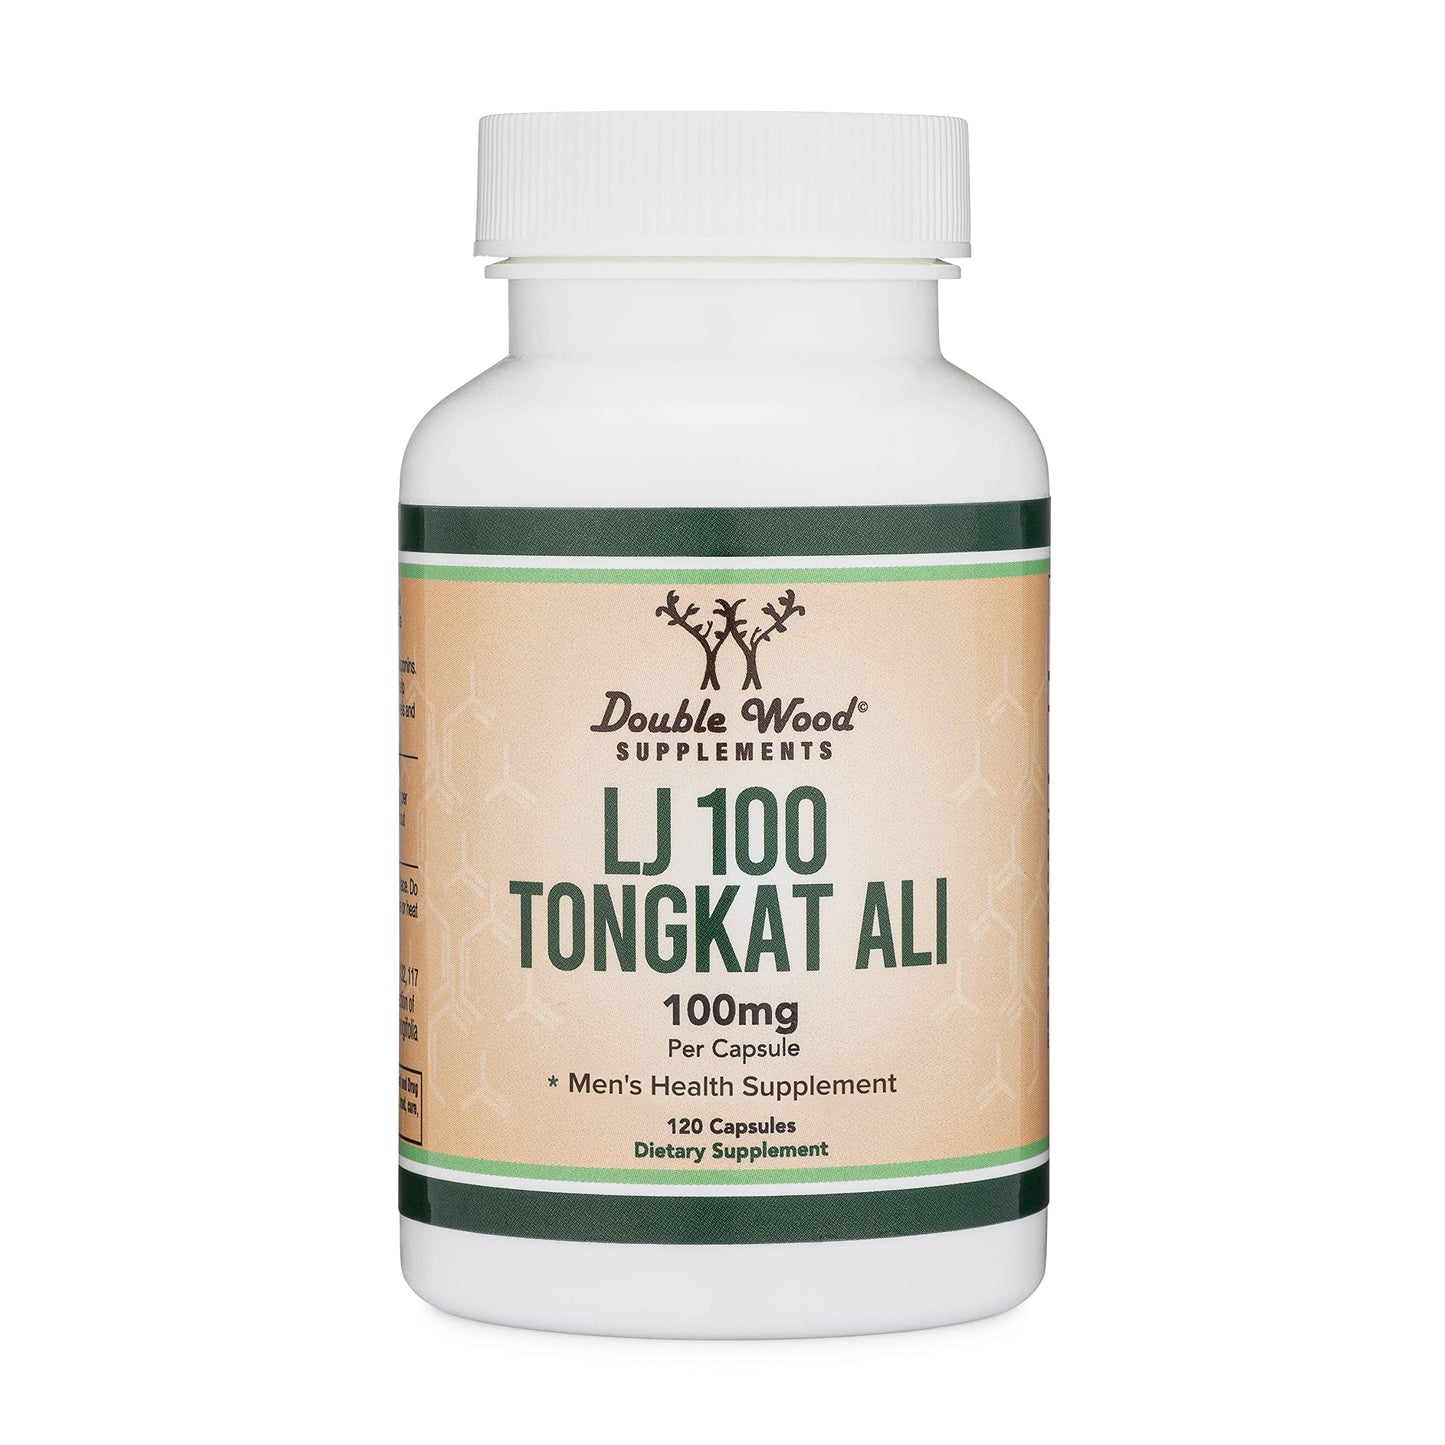 Tongkat Ali for Men (120 Capsules) by Double Wood Supplements